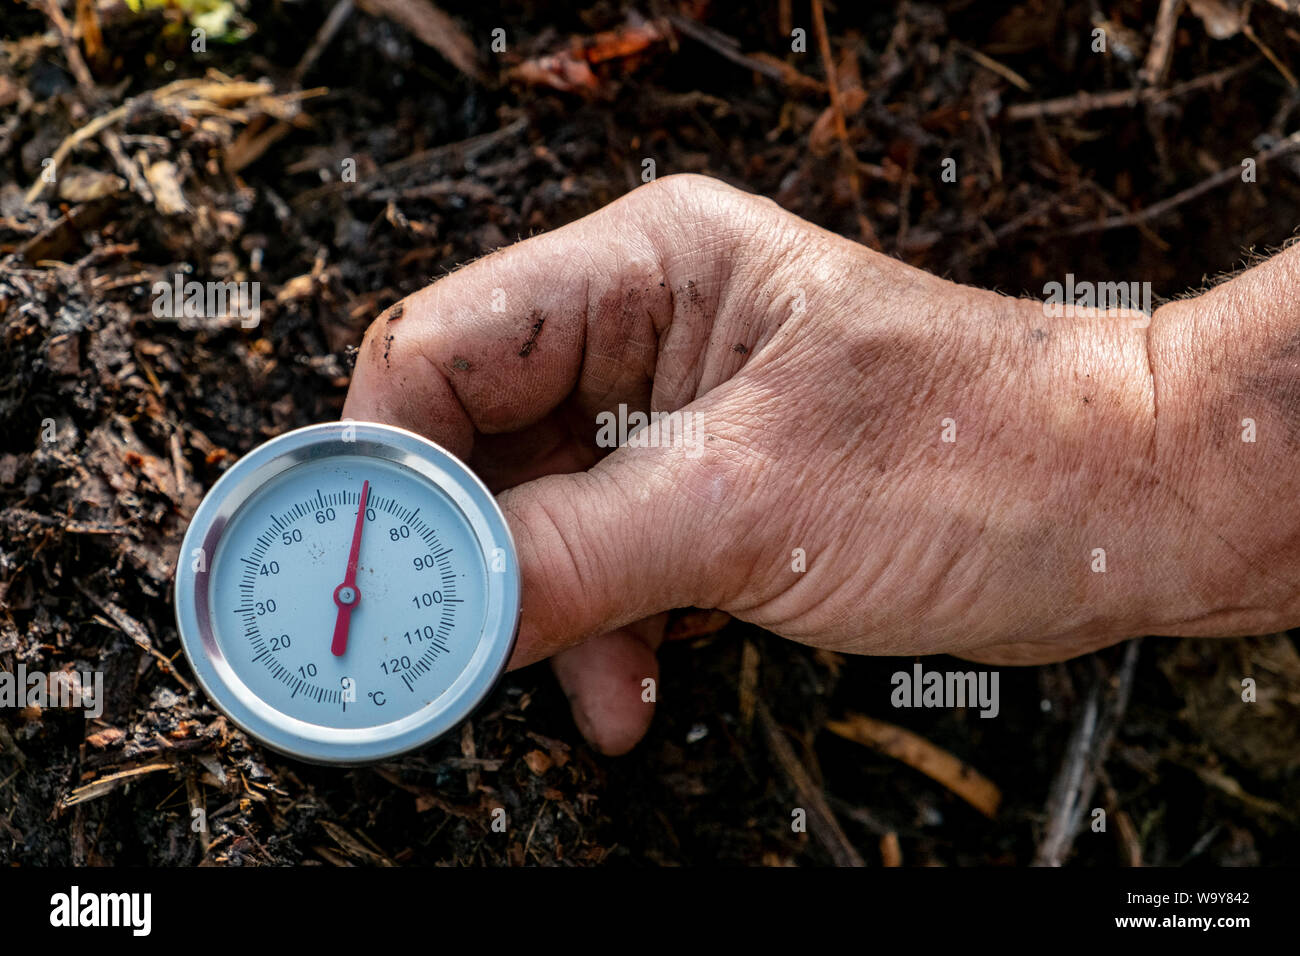 Compost thermometer reading a measurement of almost 70 degrees Celsius. Stock Photo